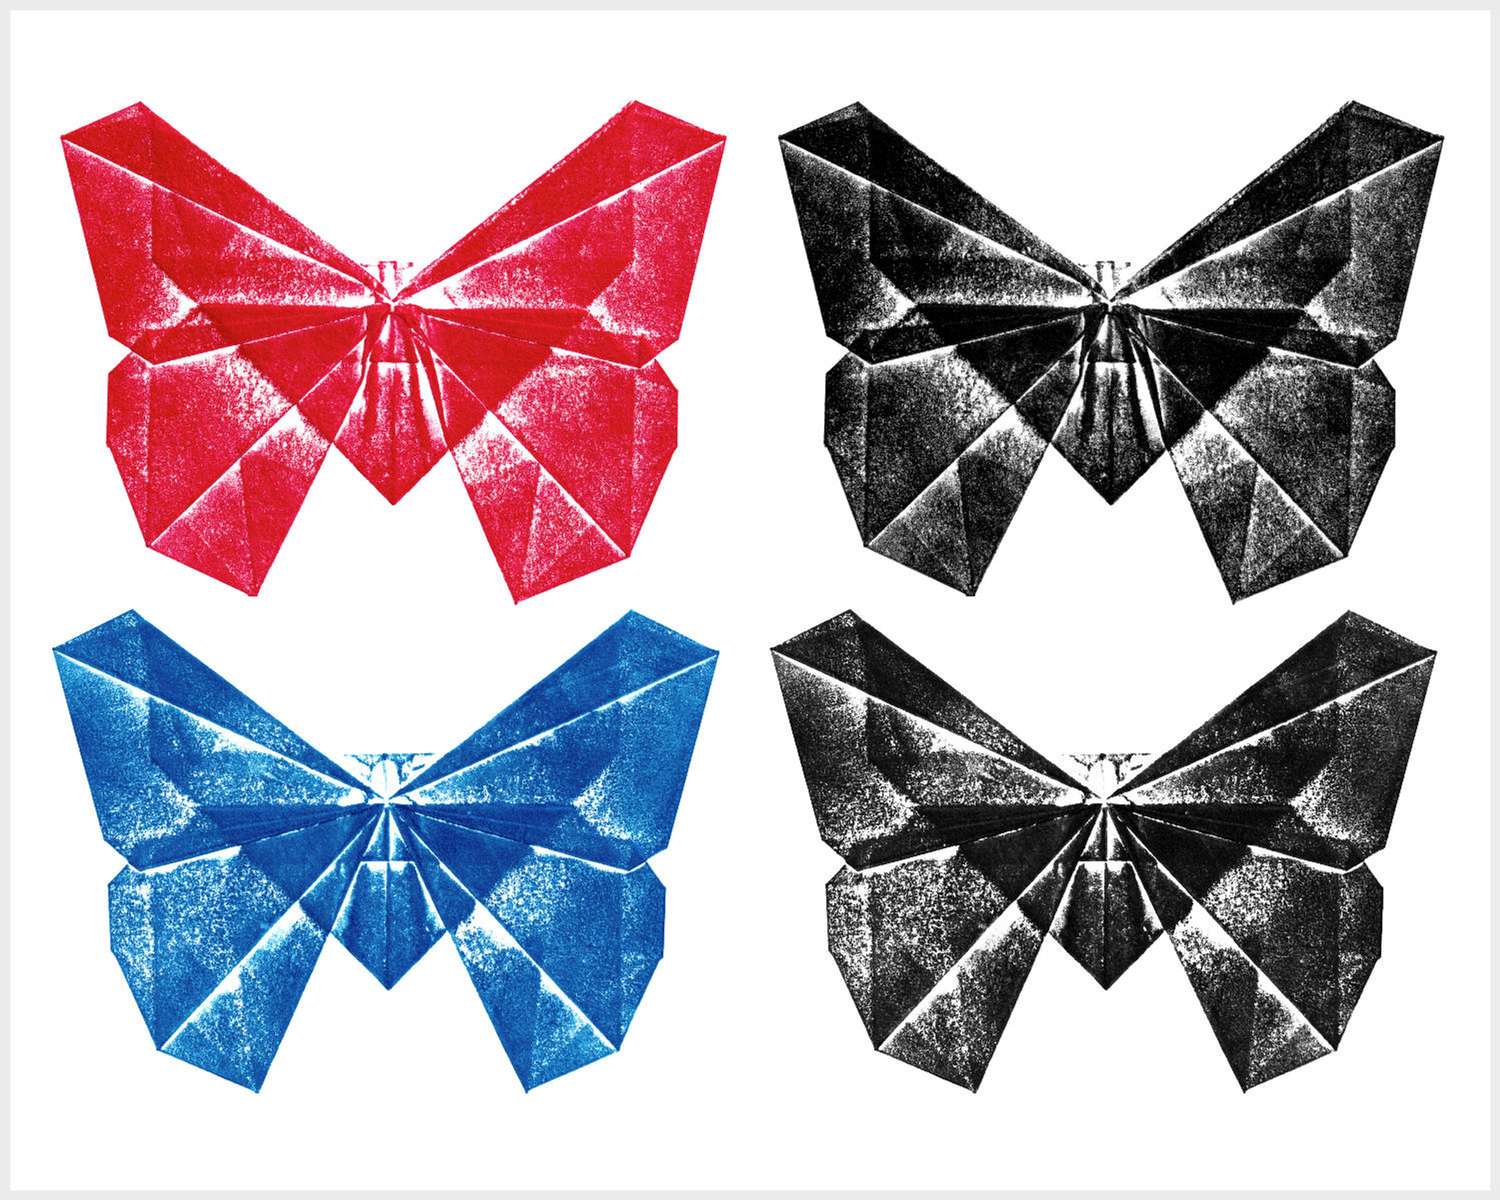 Four geometric butterflies arrayed in a 2x2 grid. The butterflies on the left are blue and magenta; the butterflies on the right are black.